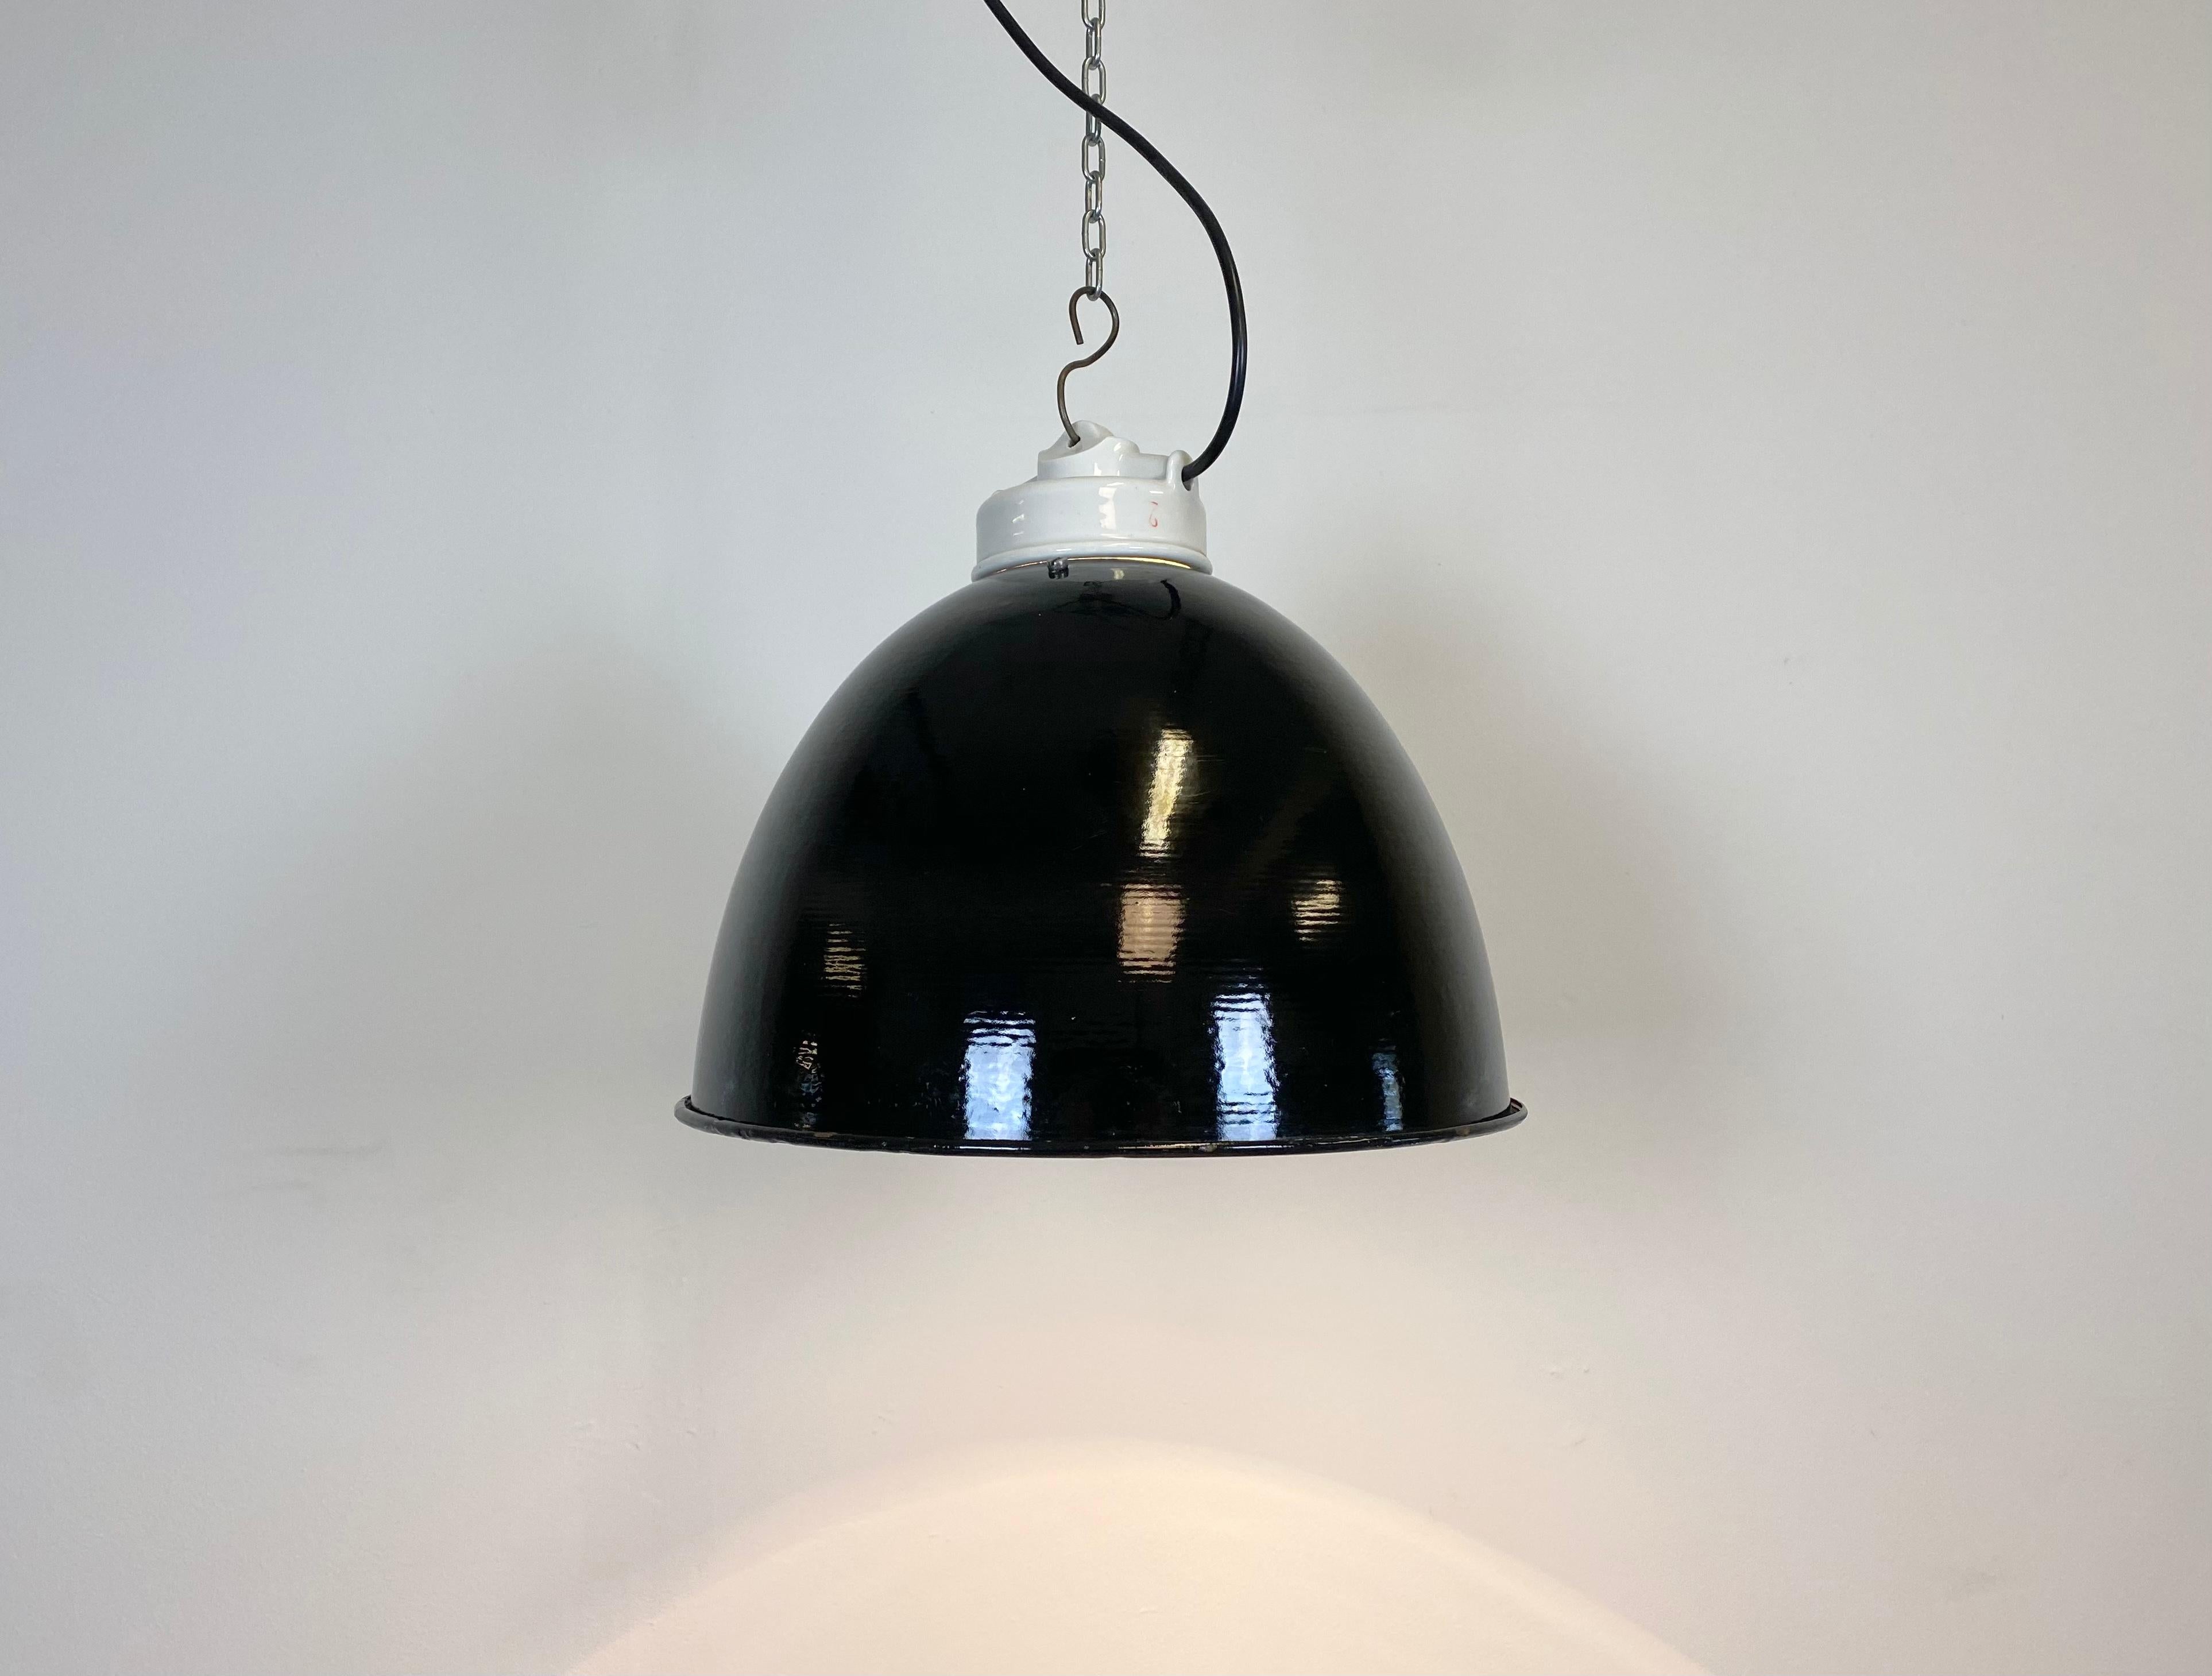 Glass Industrial Black Enamel Lamp with Porcelain Top, 1950s For Sale